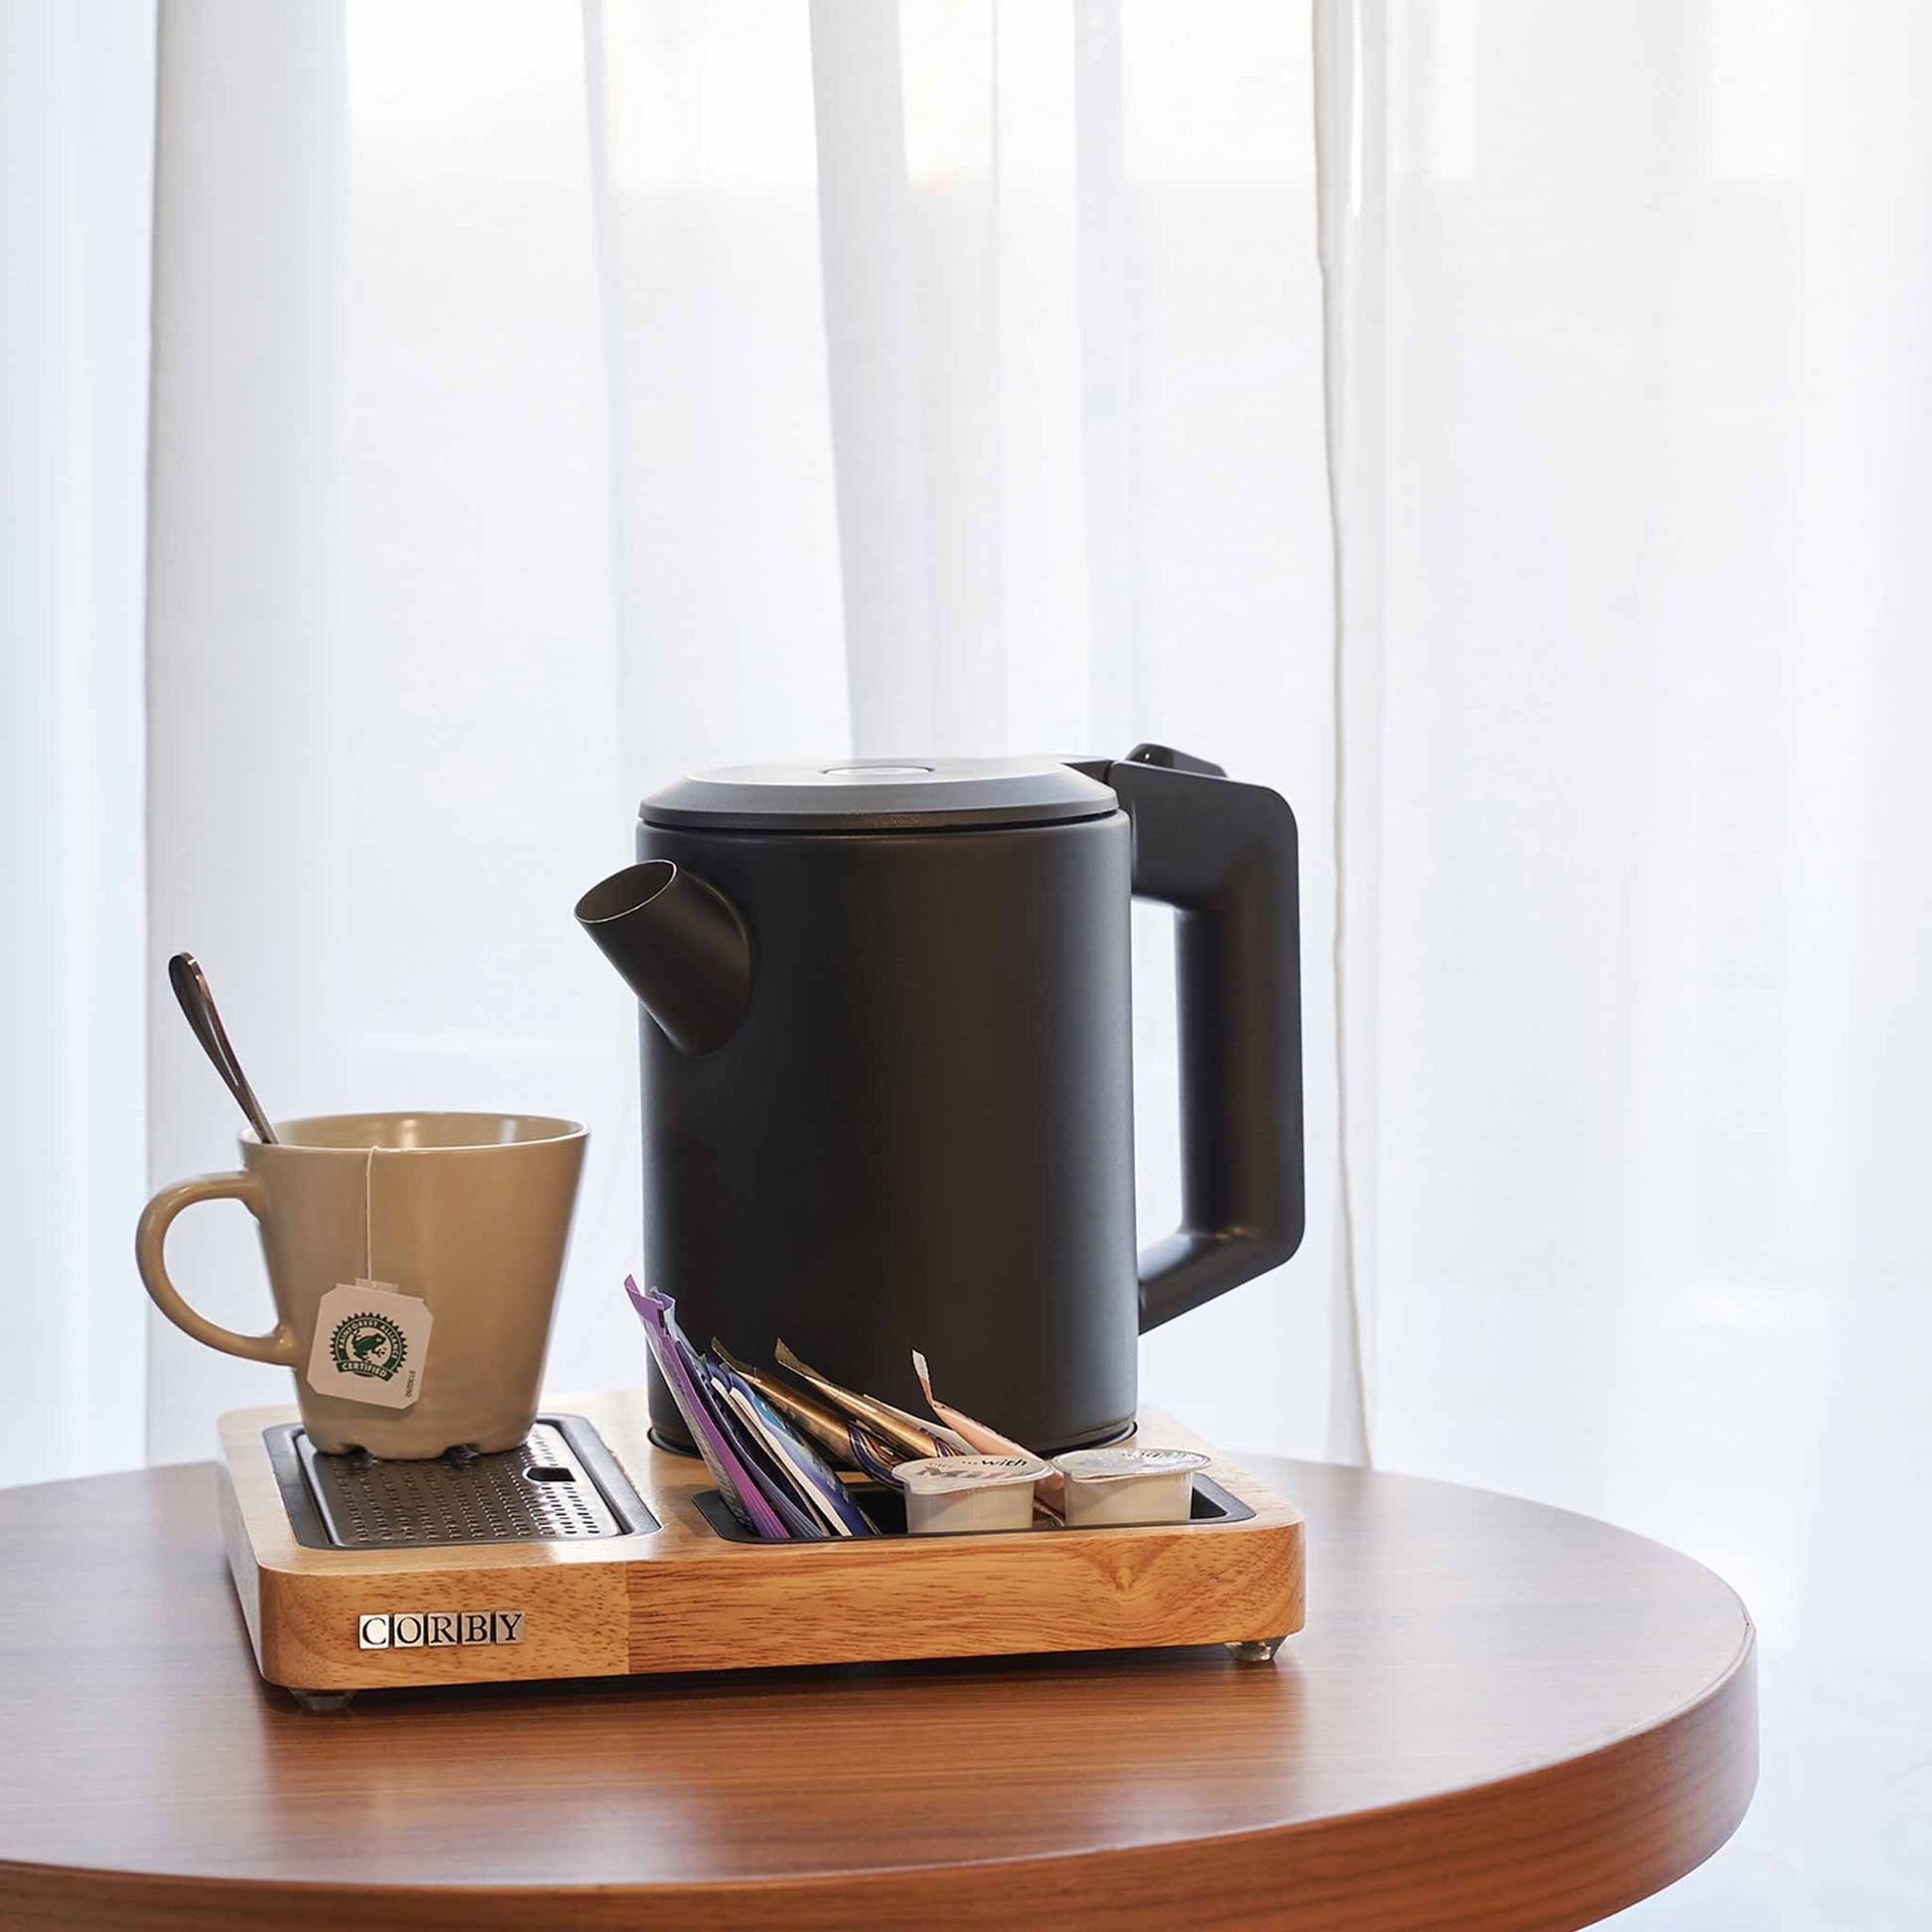 Corby canterbury compact welcome tray with black Canterbury kettle and mugs on side table